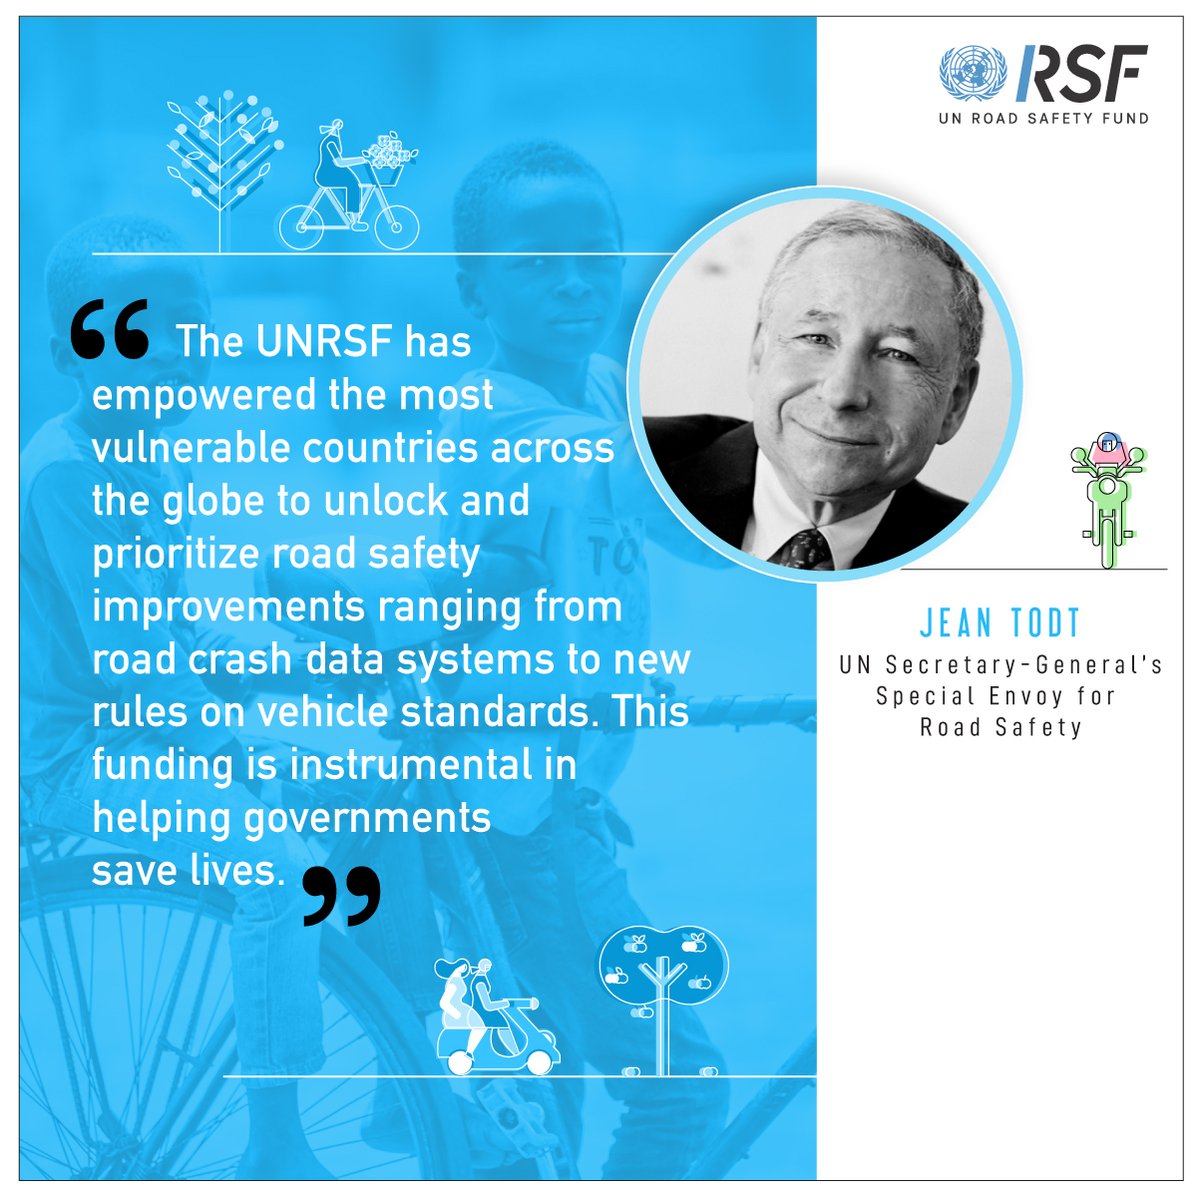 UN Secretary-General's Special Envoy for #RoadSafety @JeanTodt message during the @UN_RSF press conference at the #ITF24 Summit in Leipzig.